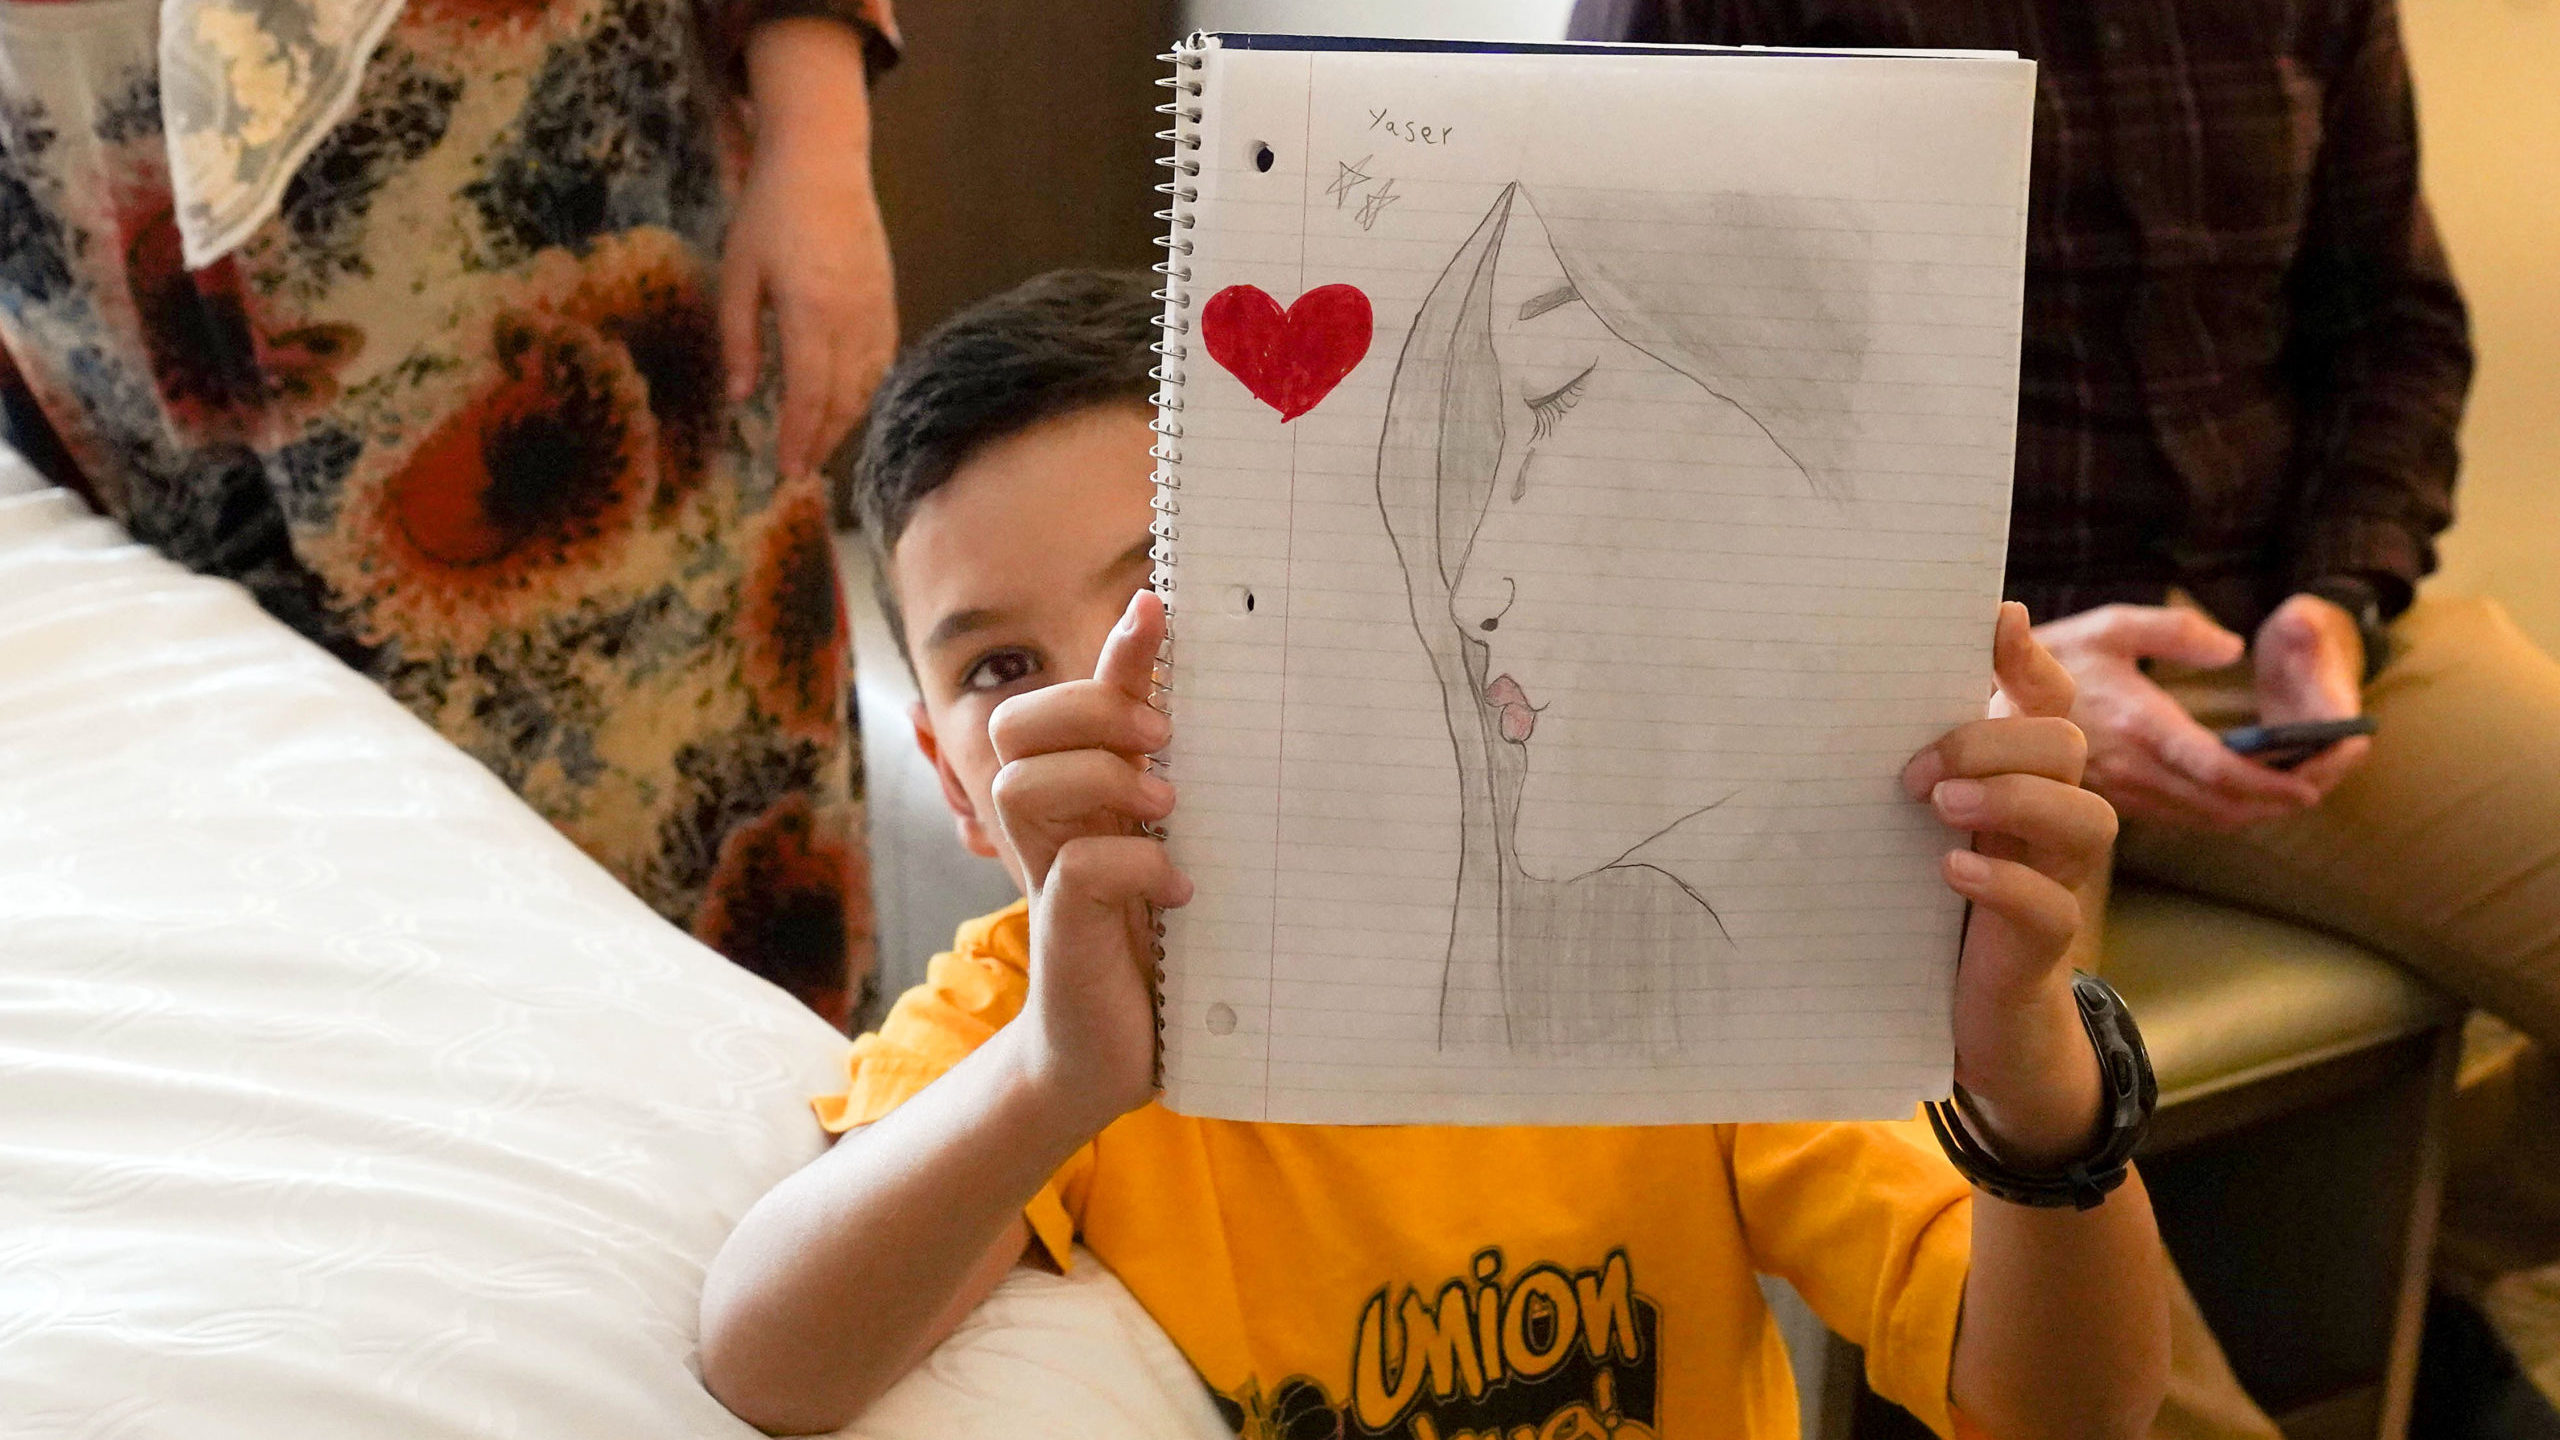 afghan community fund helps refugees arriving in utah - small boy holds drawing...